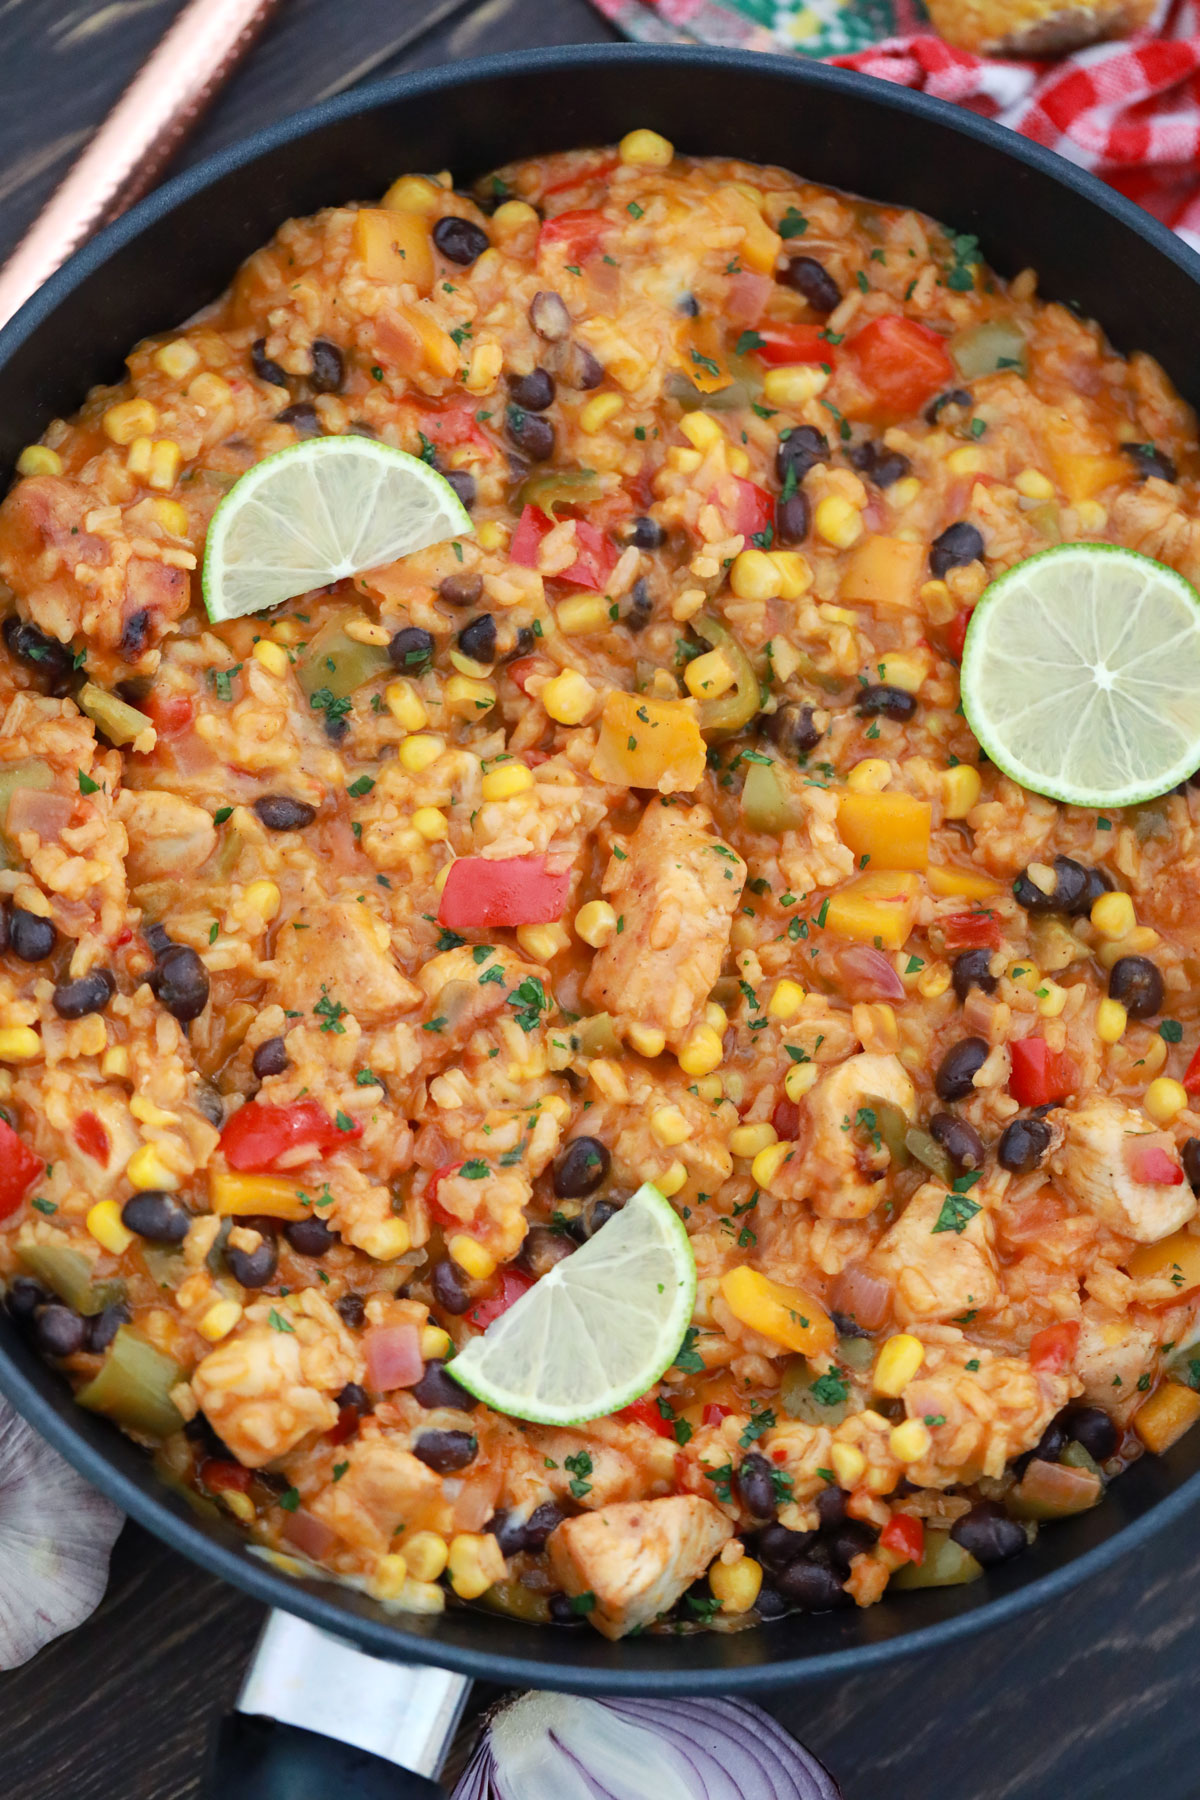 Skillet filled with one pot meal including chicken, rice, beans, peppers, cheese and more for a fun tex-mex meal.